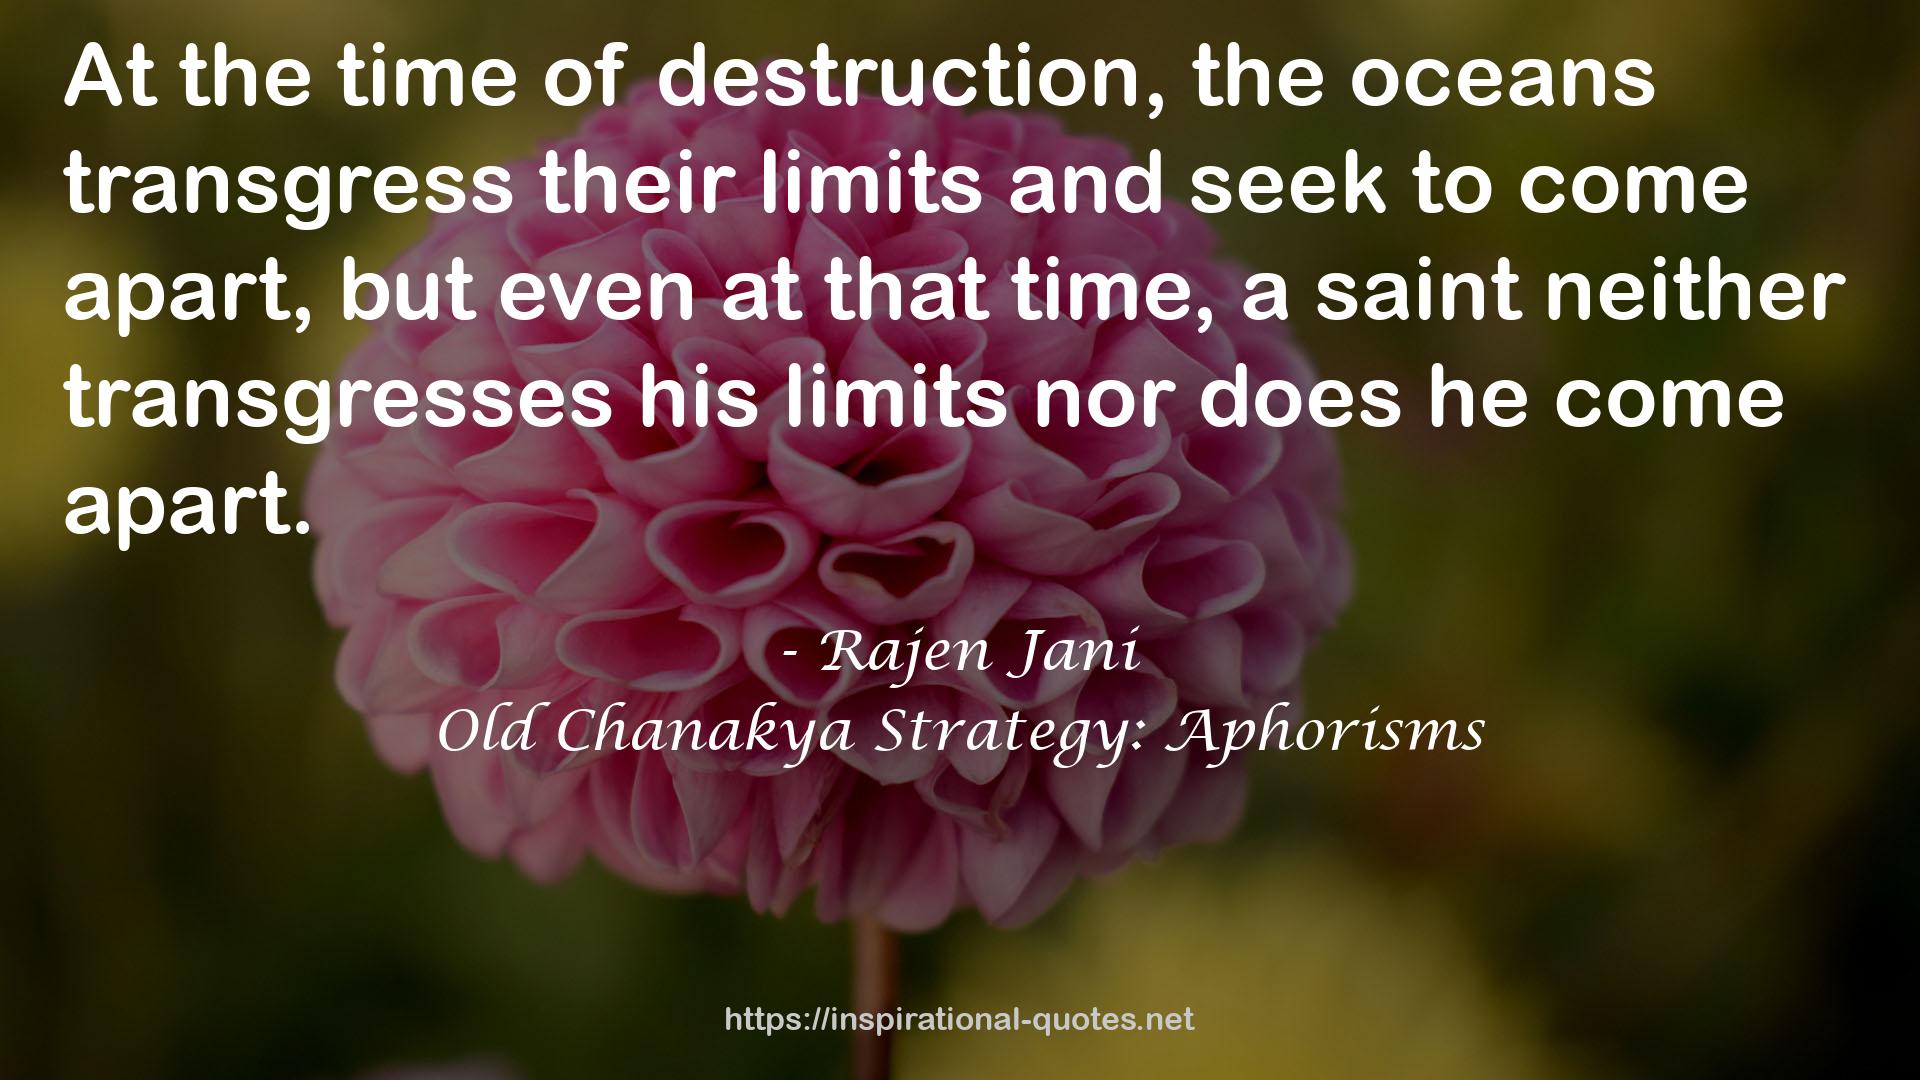 Old Chanakya Strategy: Aphorisms QUOTES